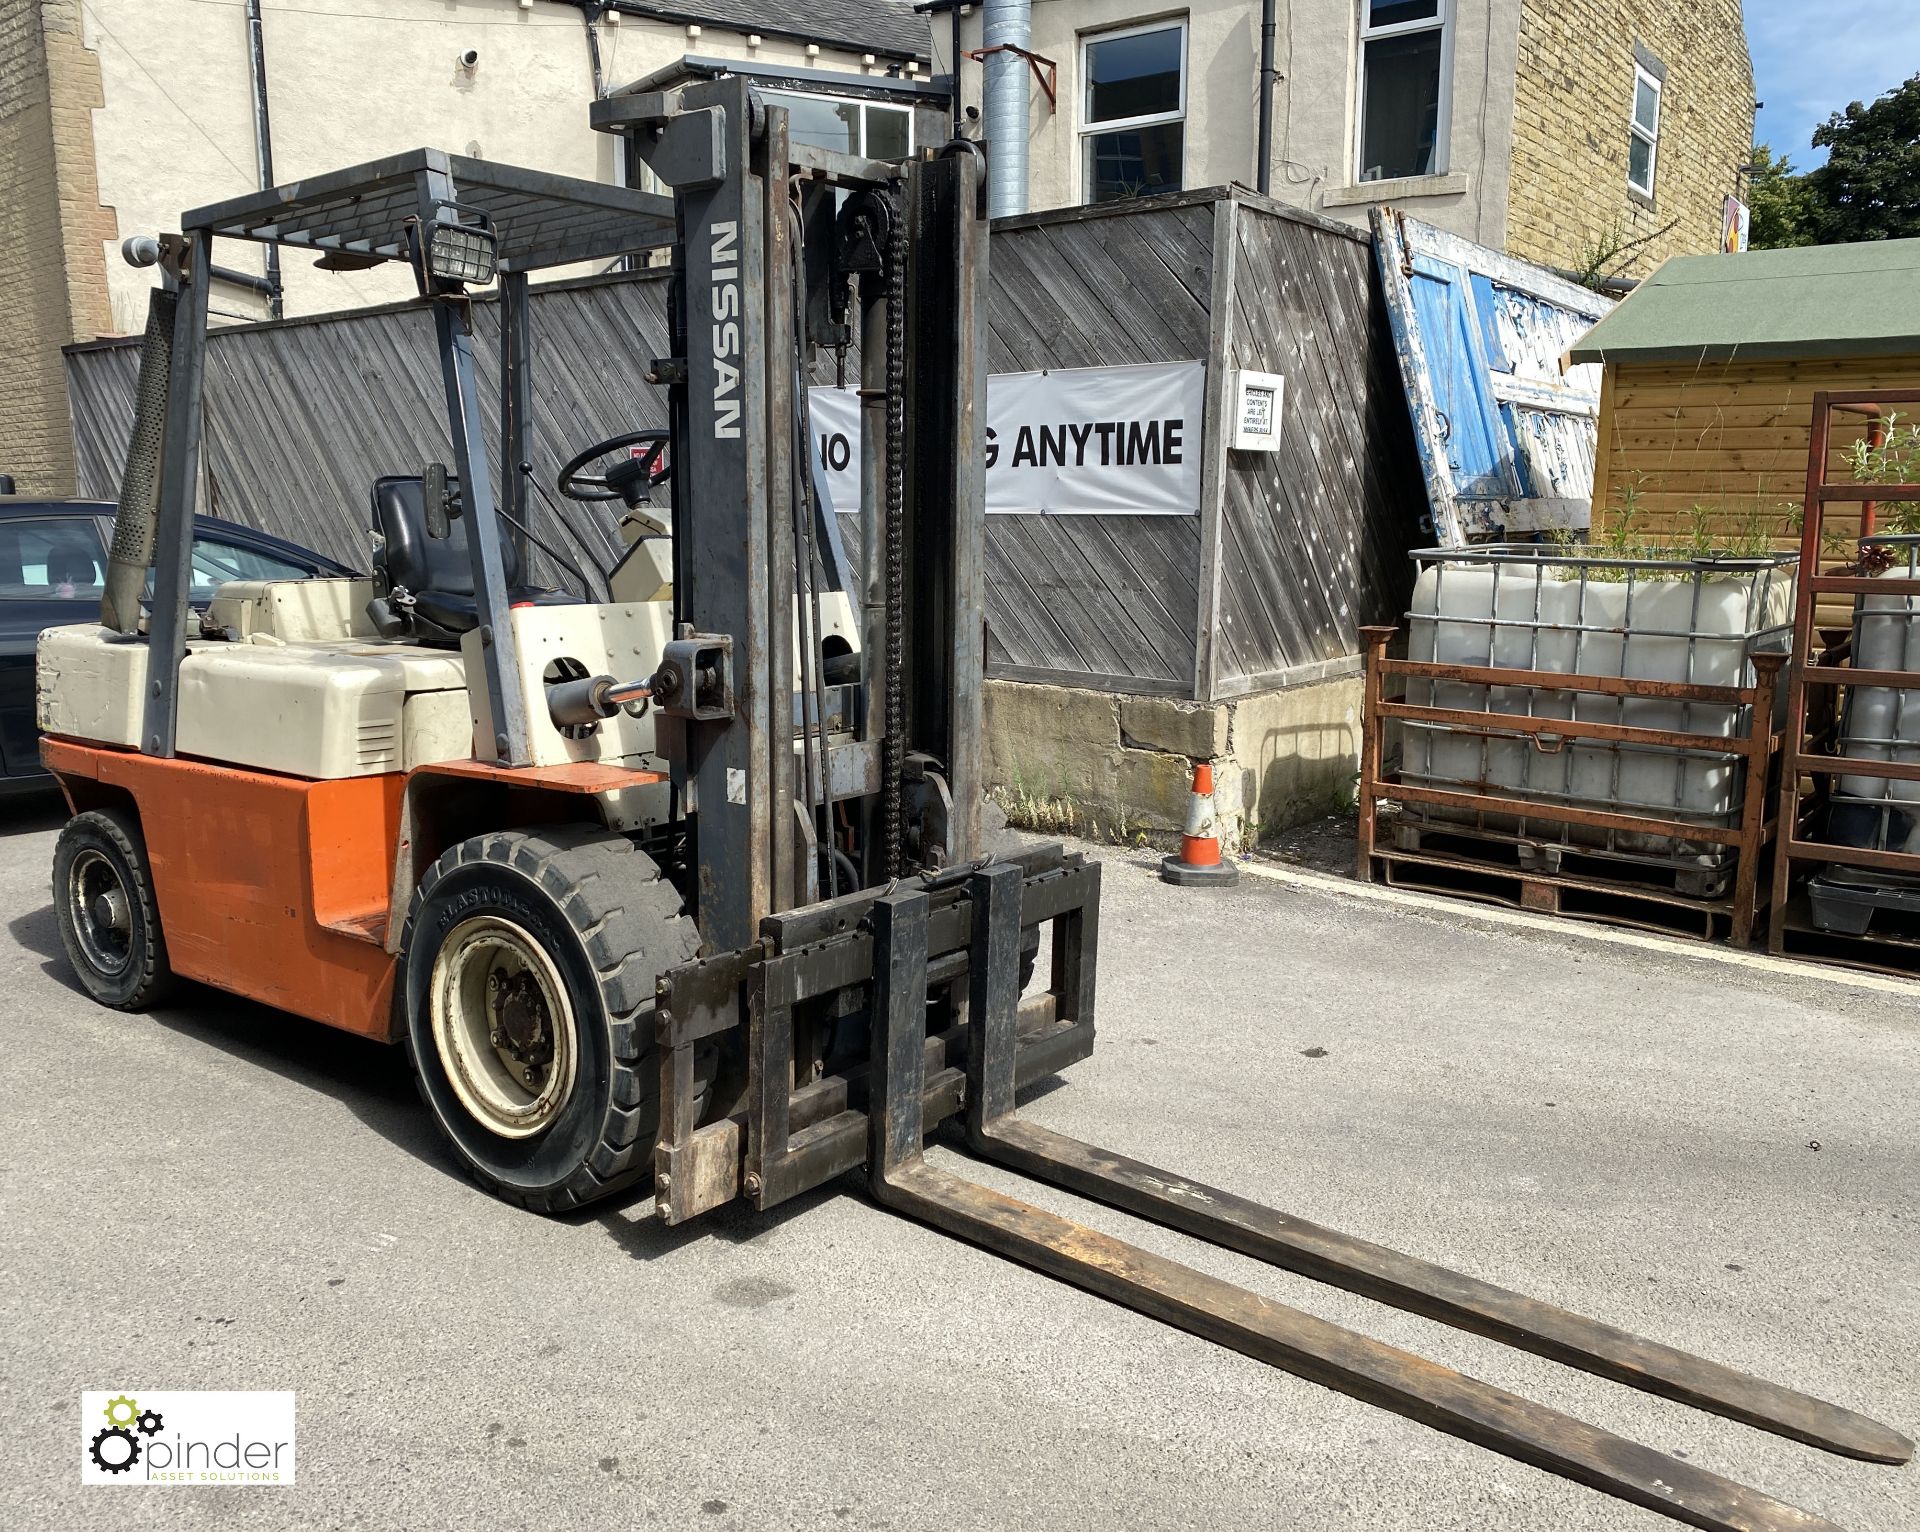 Nissan WGF03A400 diesel Forklift Truck, 4000kg lift capacity, 20478hours, 3300mm lift height, 2250mm - Image 4 of 11